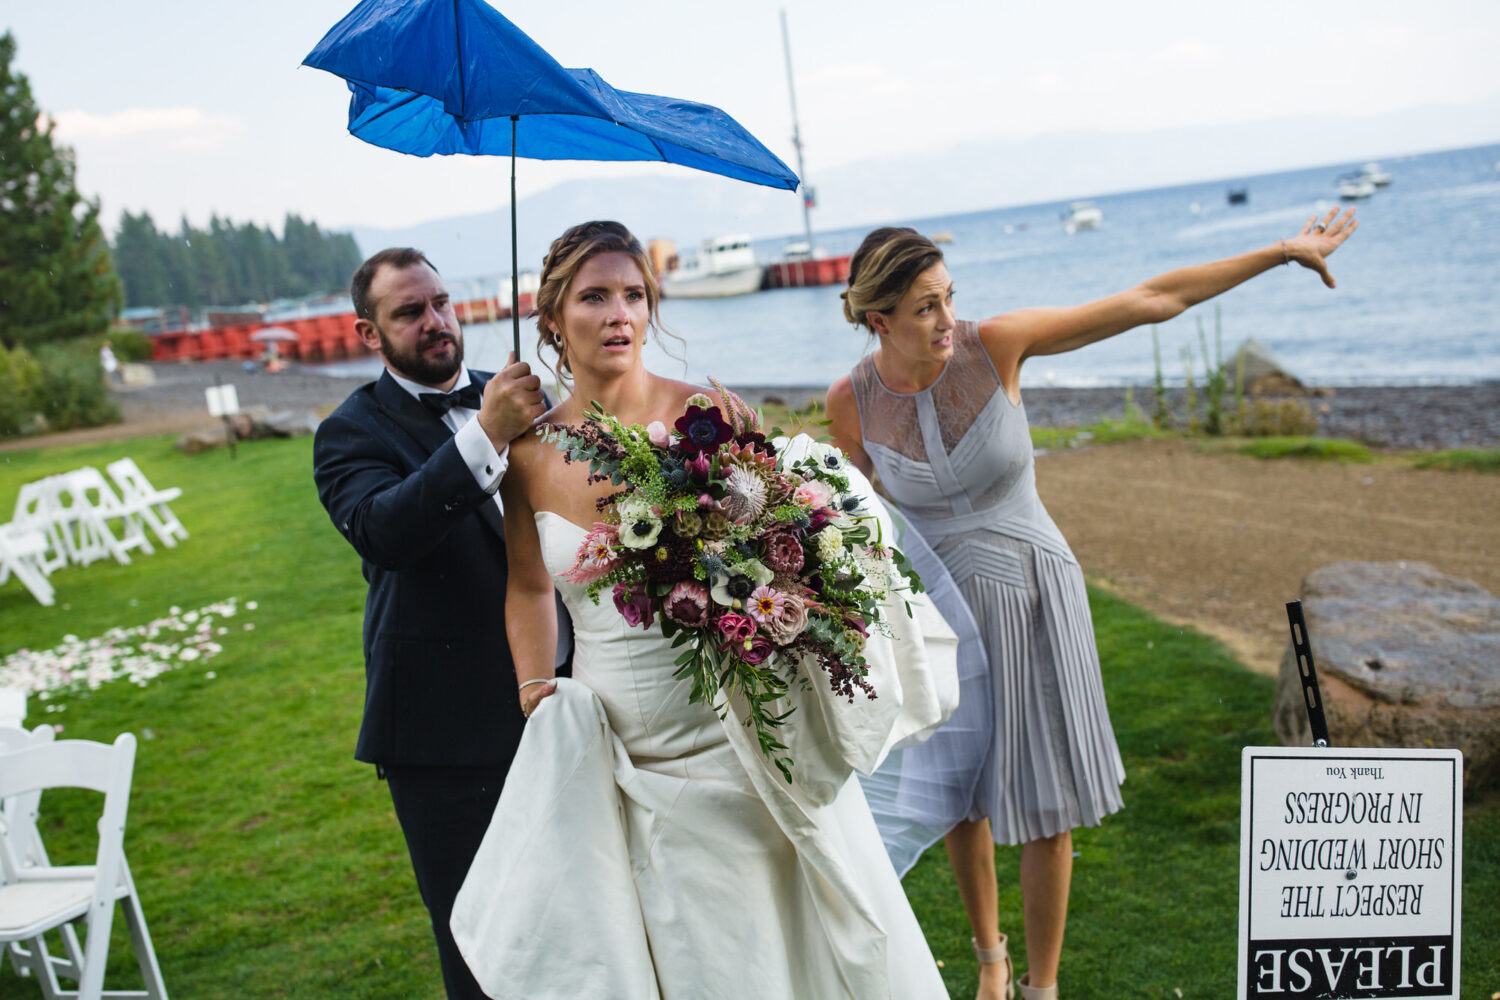 A stressful wedding day unfolds when a thunderstorm brings rain to a lakeside venue.